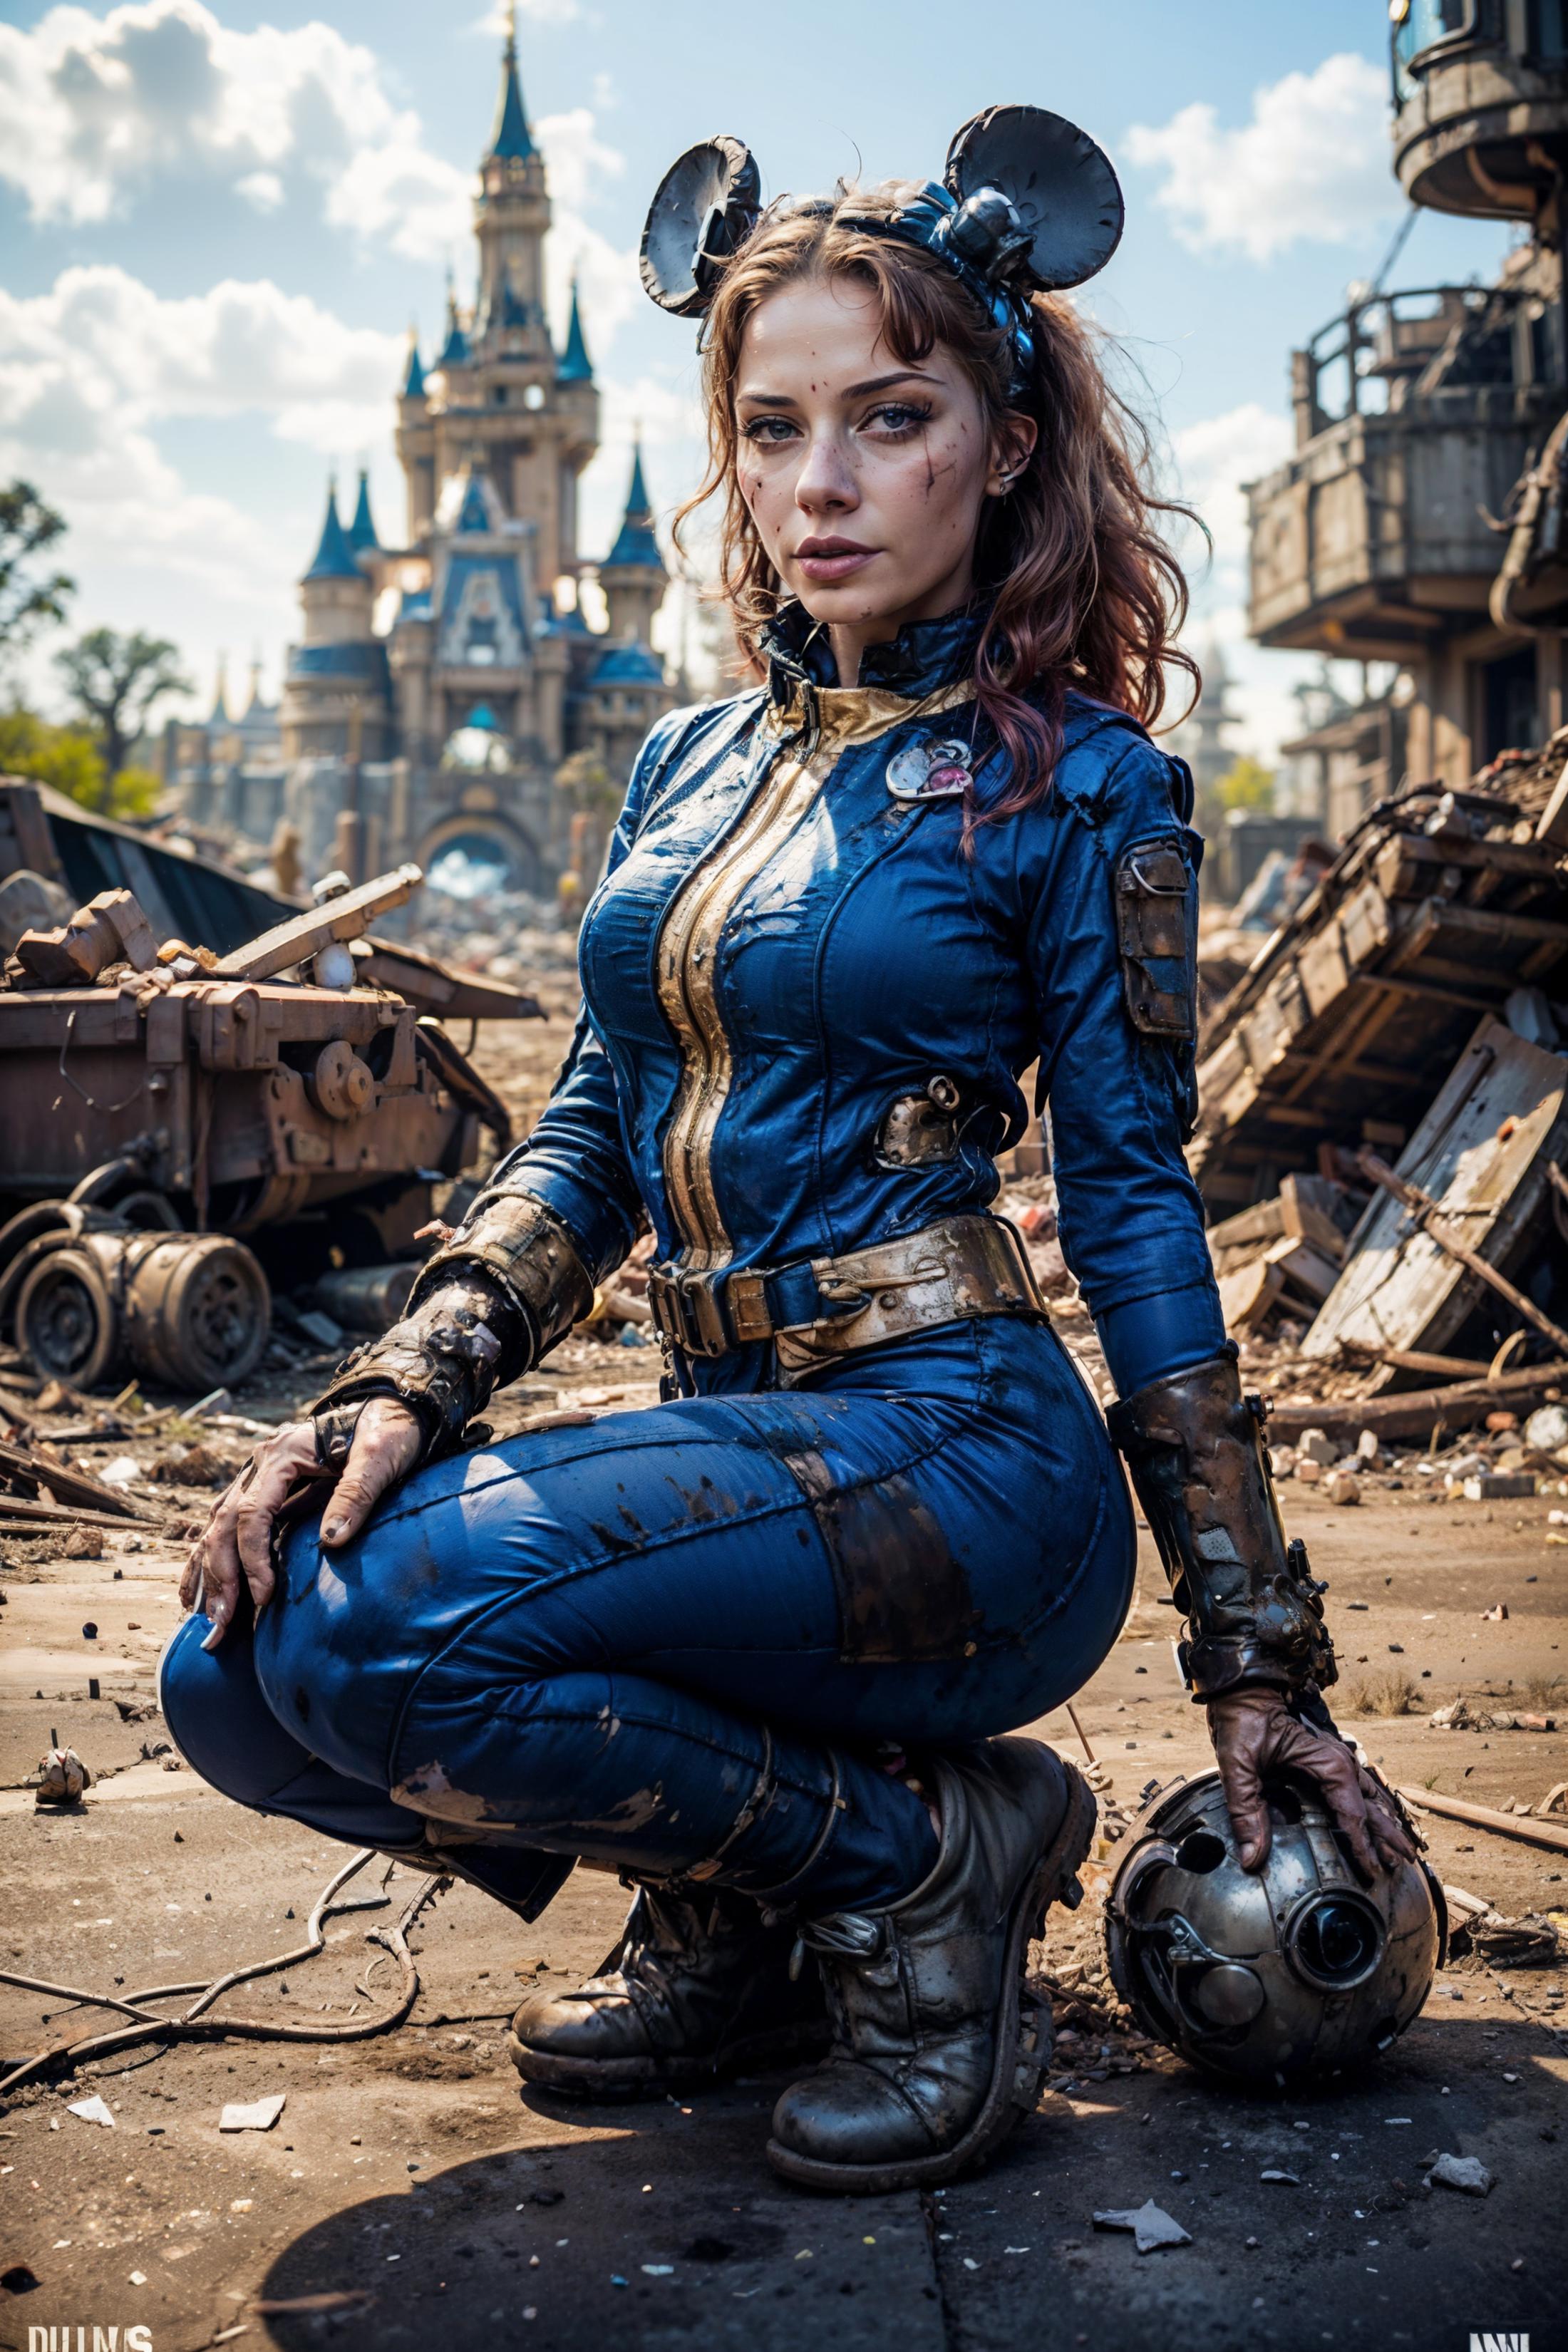 Vault Jumpsuit (Fallout) LoRA image by mrbrightside